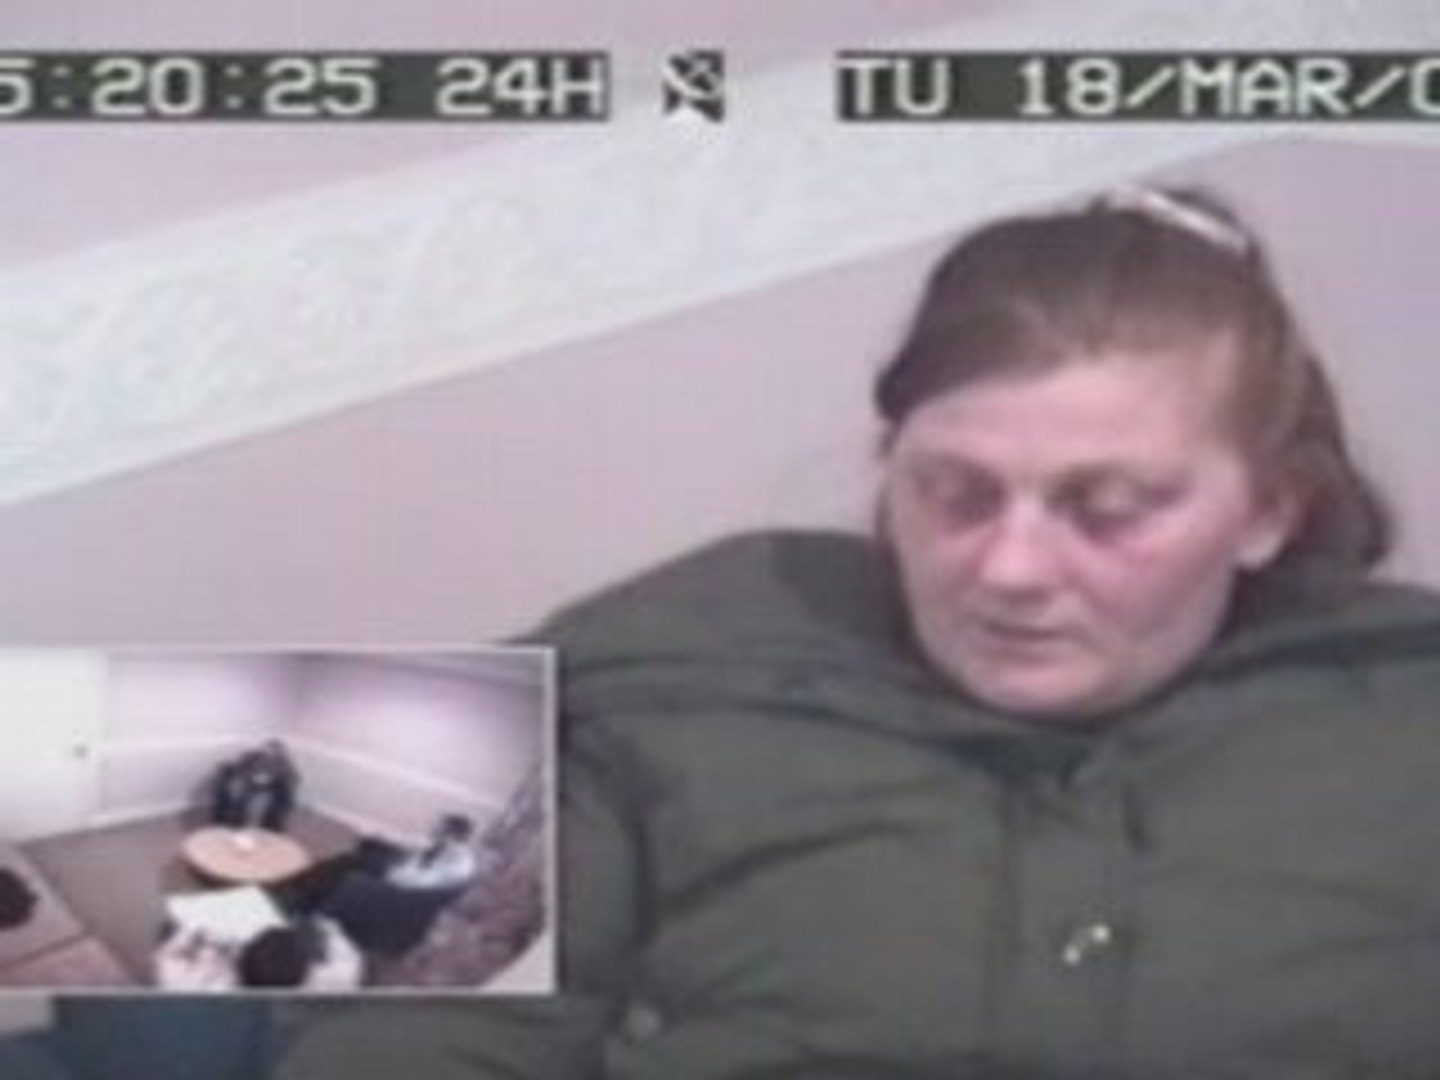 Shannon case - police interviews - video Dailymotion